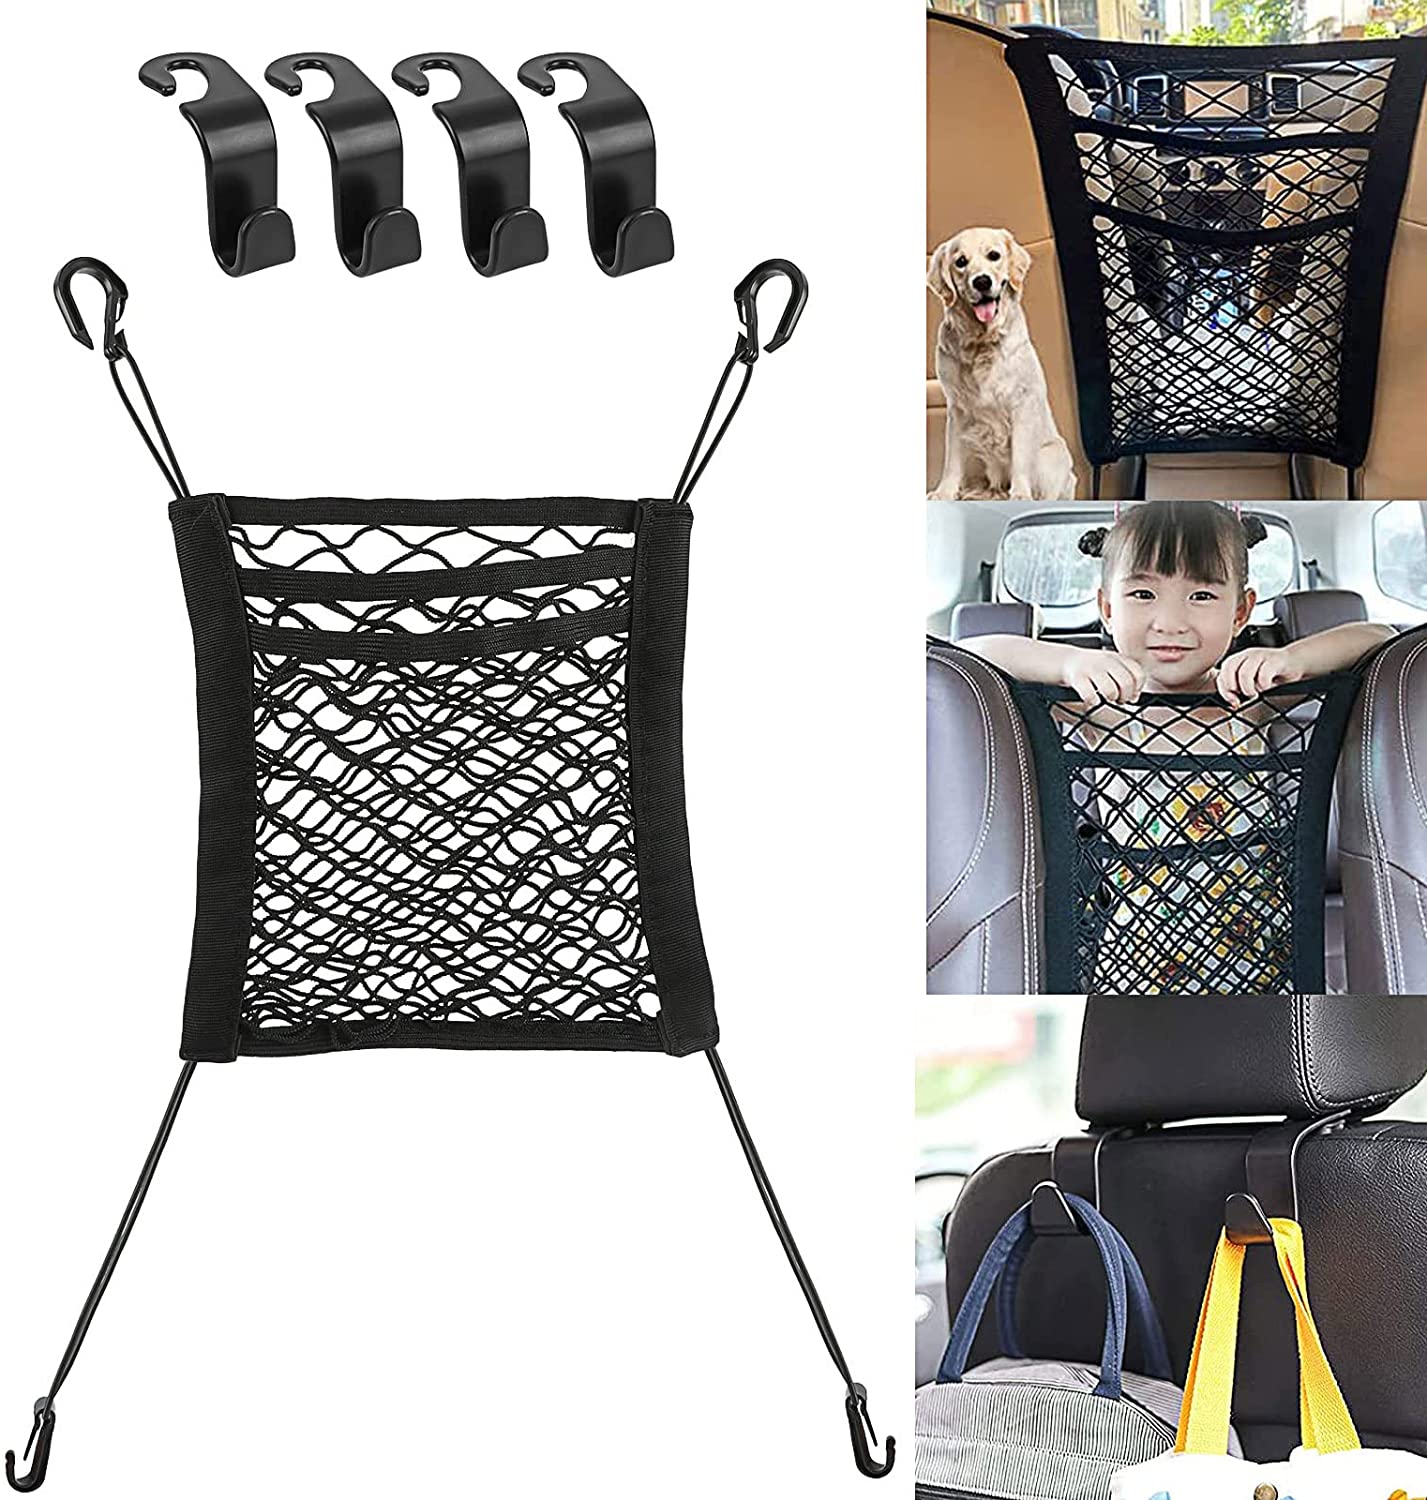 VIPITH 3 Layer Car Mesh Organizer Seat with 4 Hooks Seat Back Net Bag Purse  Holder for Car Barrier of Pet Kids Tissue Purse Holder Driver Storage  Netting Pouch